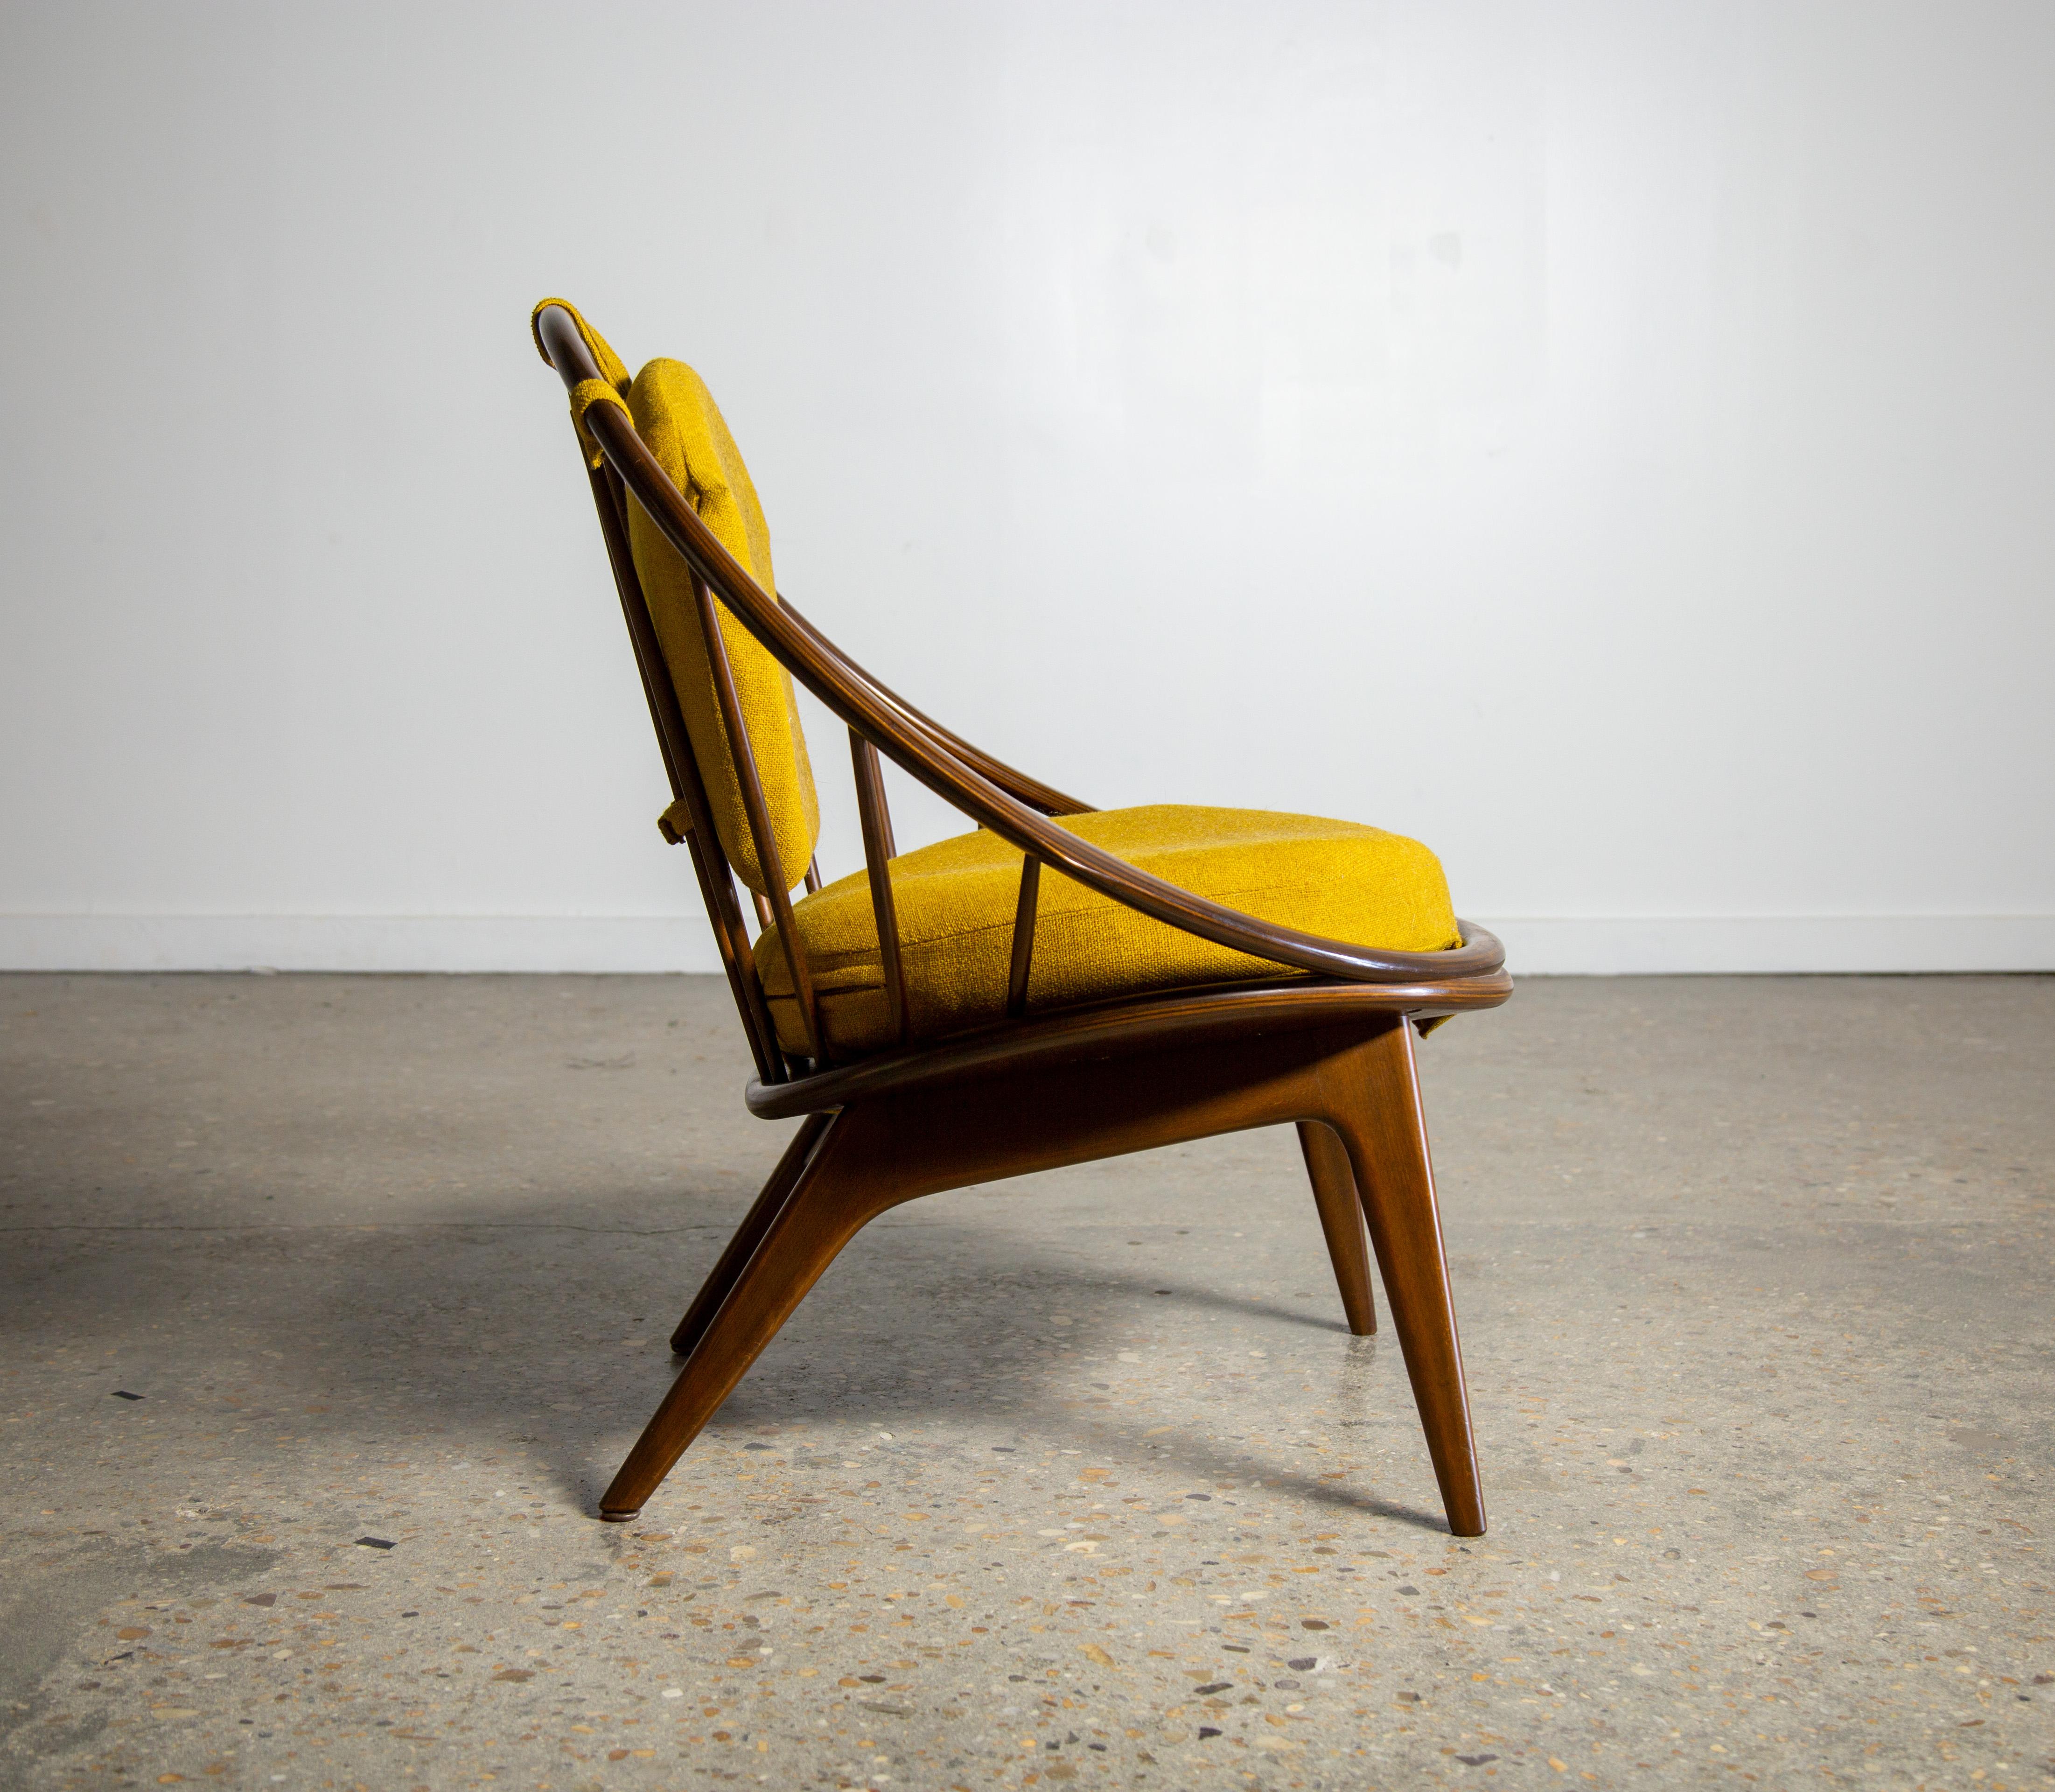 The Hoop Chair designed by Ib Kofod Larsen and imported by Selig. This example from the 1960s shows very well. A darker stain on the Birch and new Yellow Danish wool and cushions. This chair is ready to go another 60 years. Retains its original